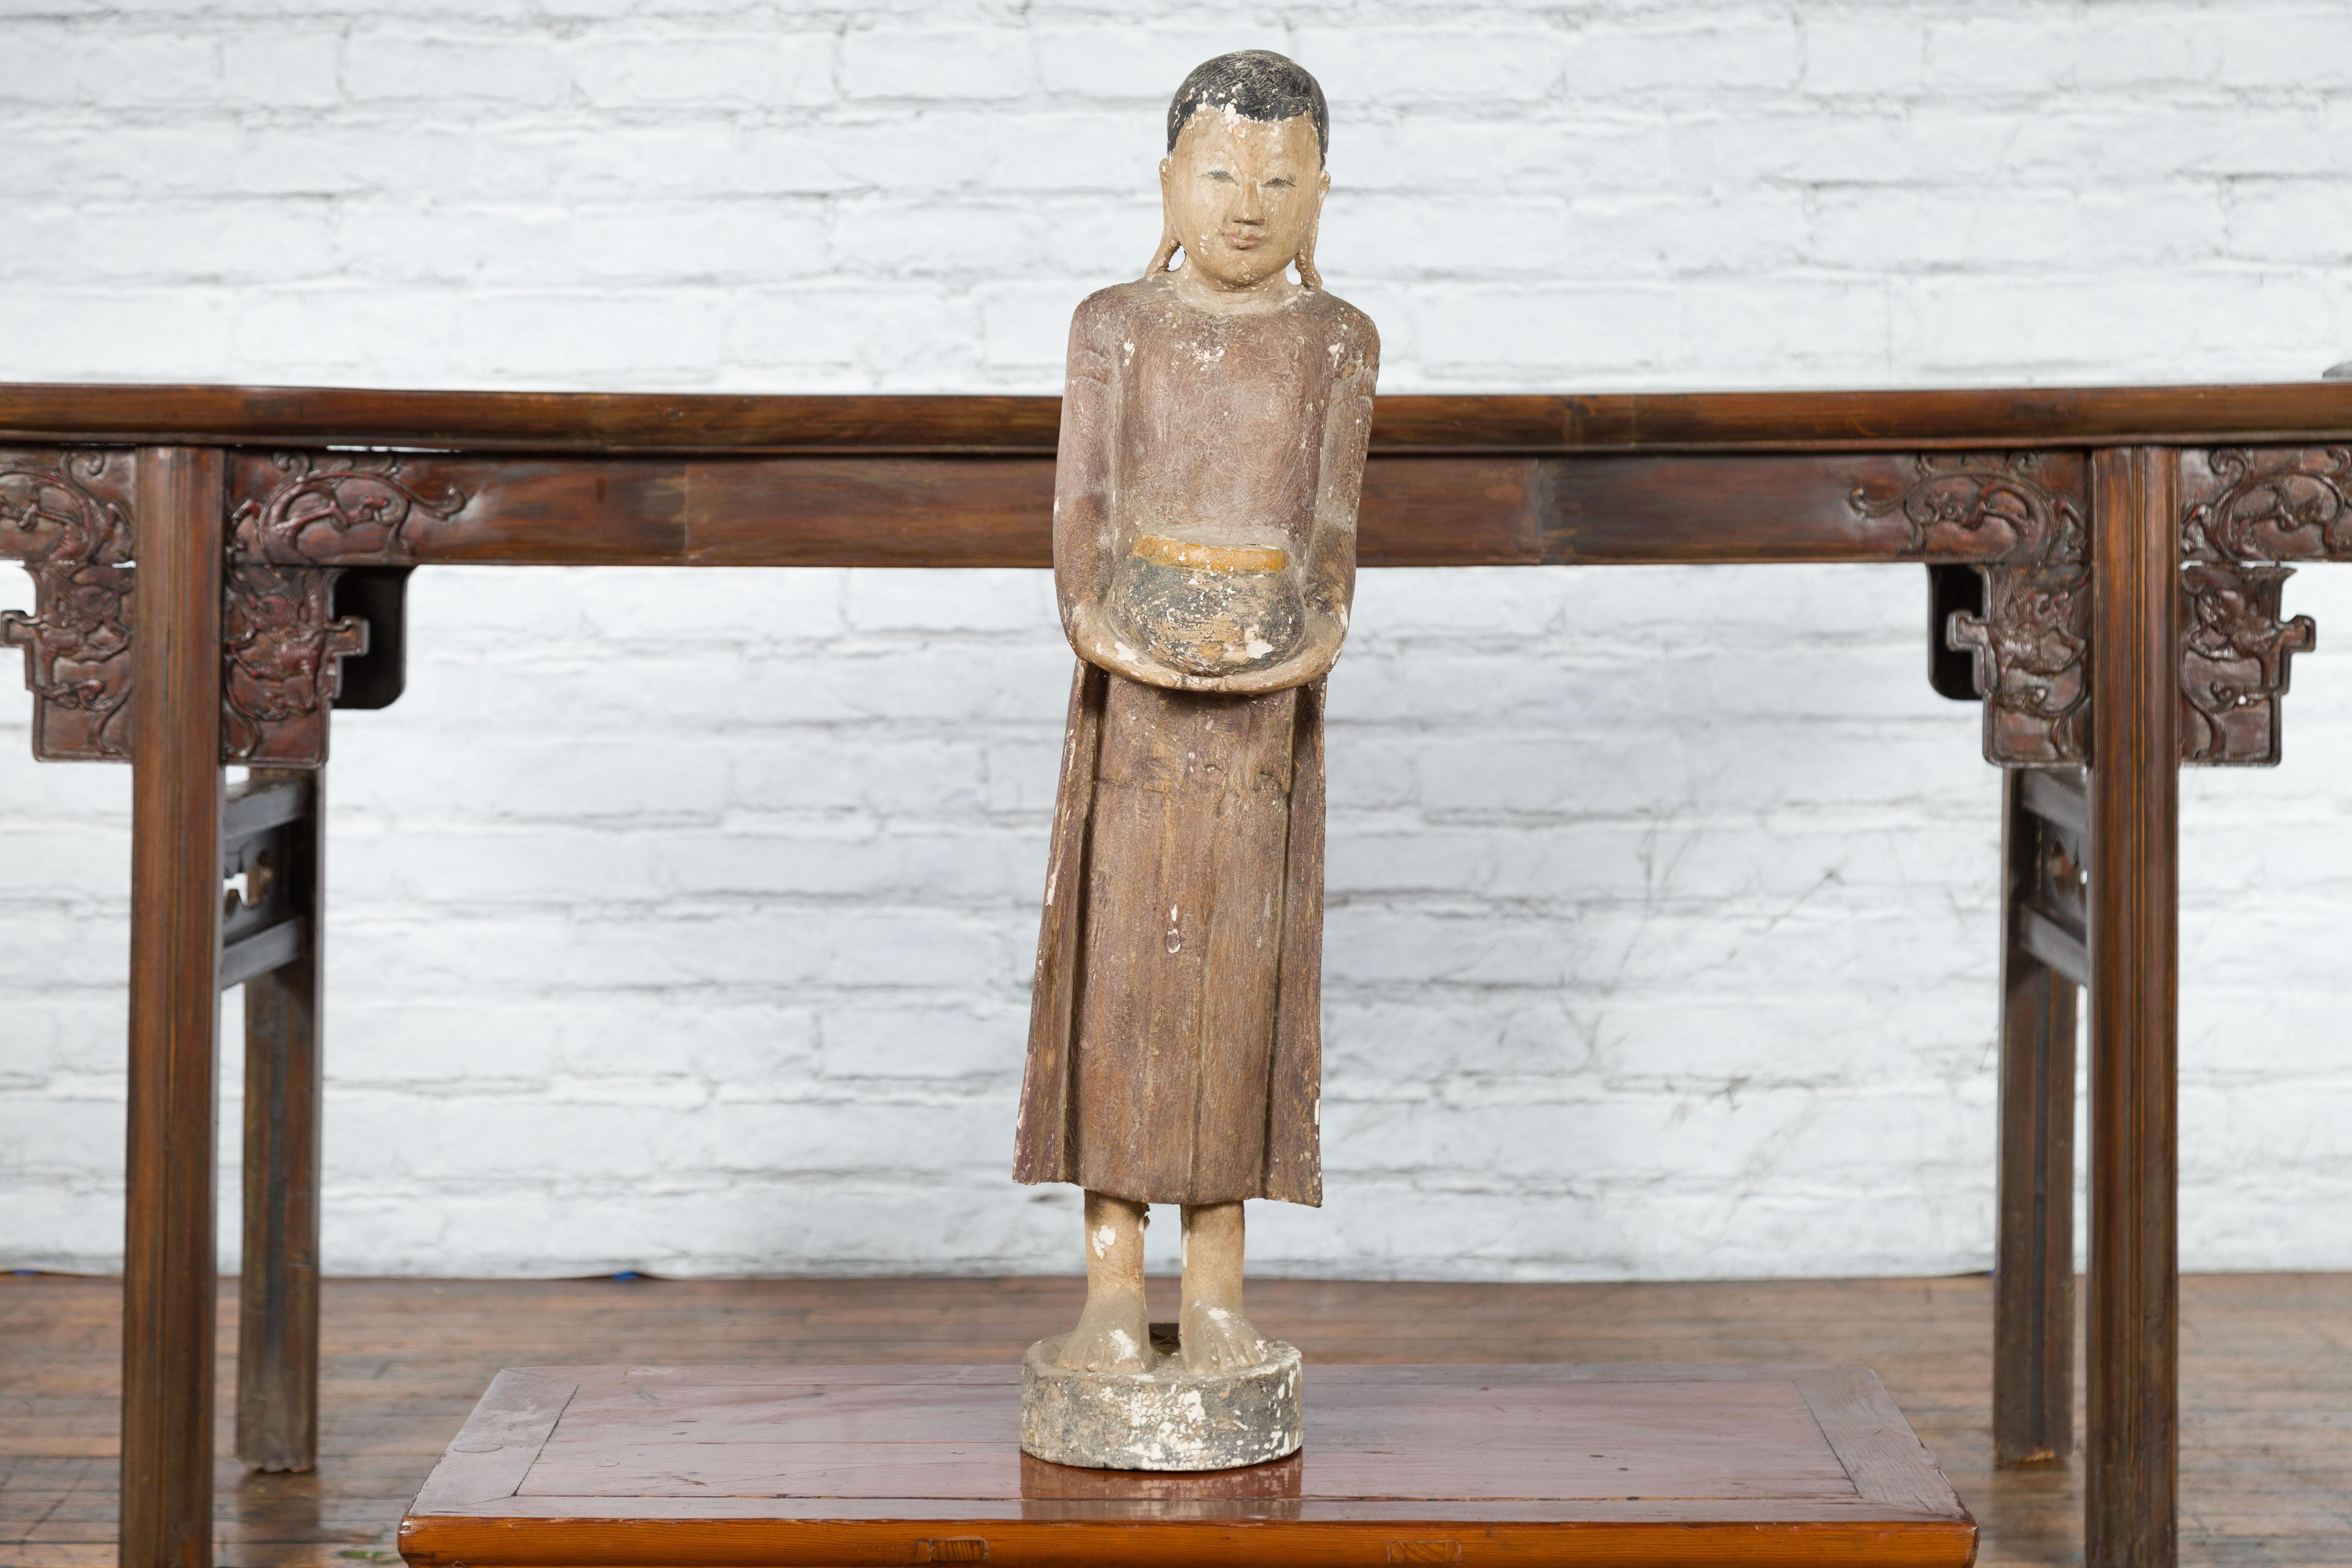 Painted Thai Hand-Carved Standing Buddhist Monk Sculpture on Base with Offering Bowl